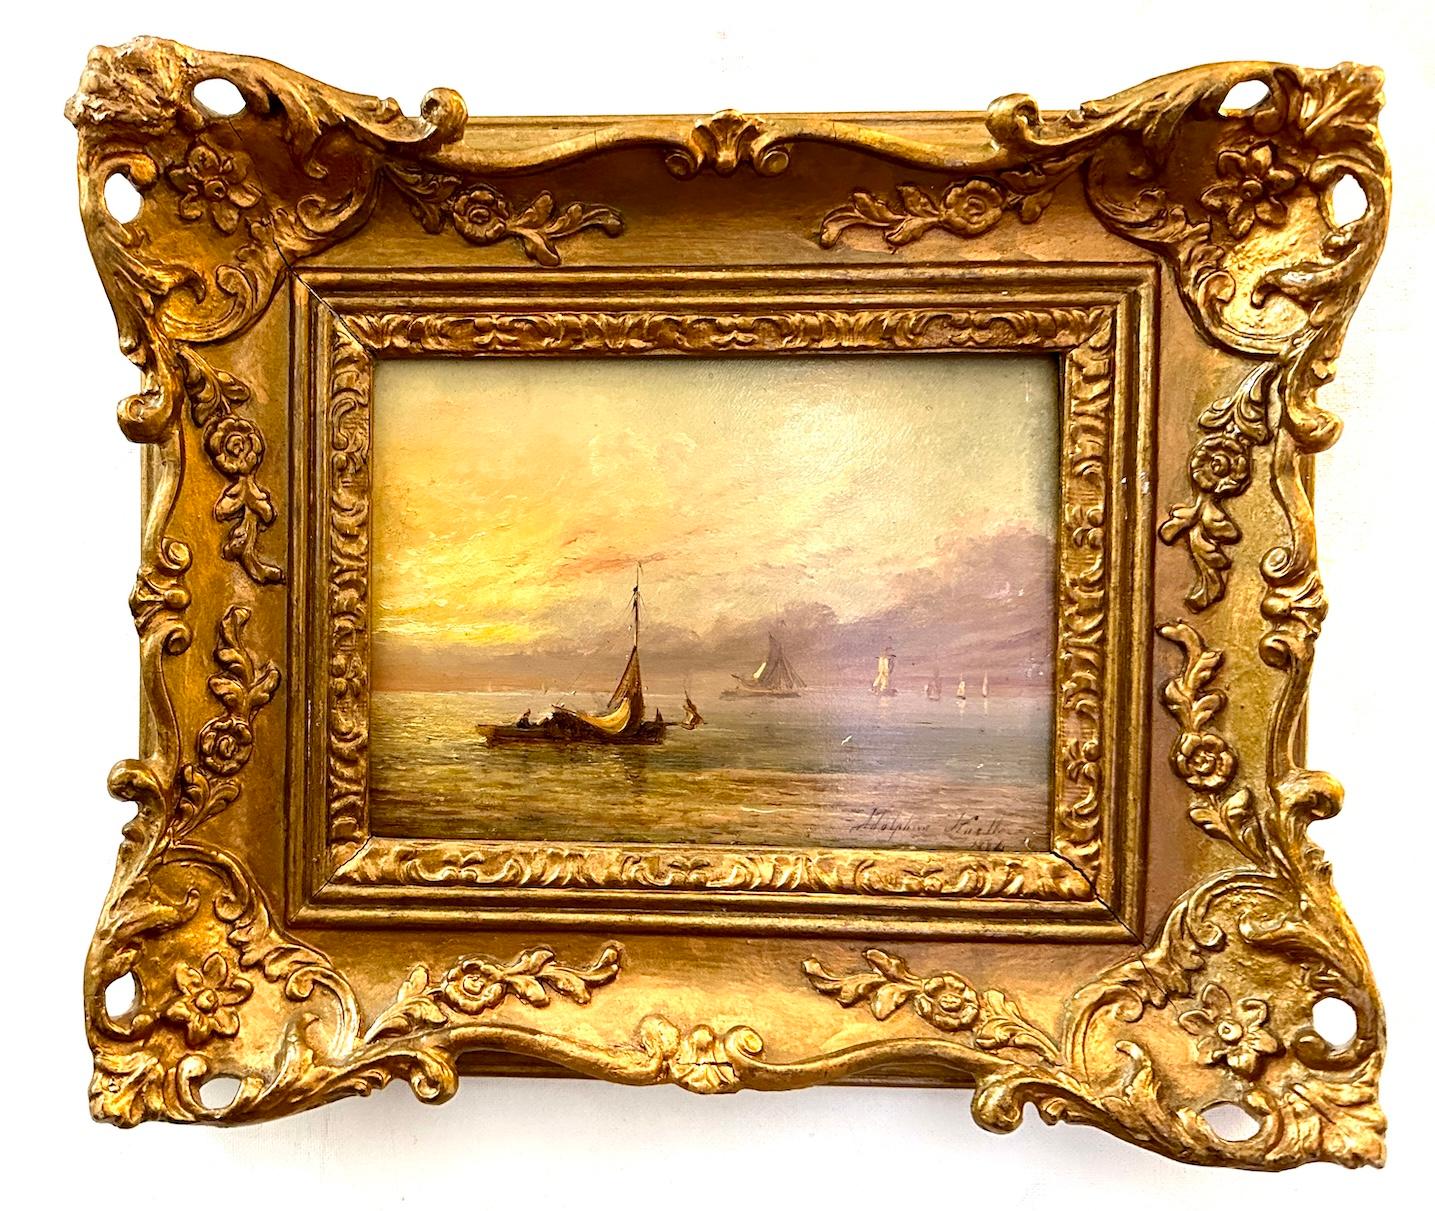 19th century English Fishing boat at sea with Sun rise or Sunset